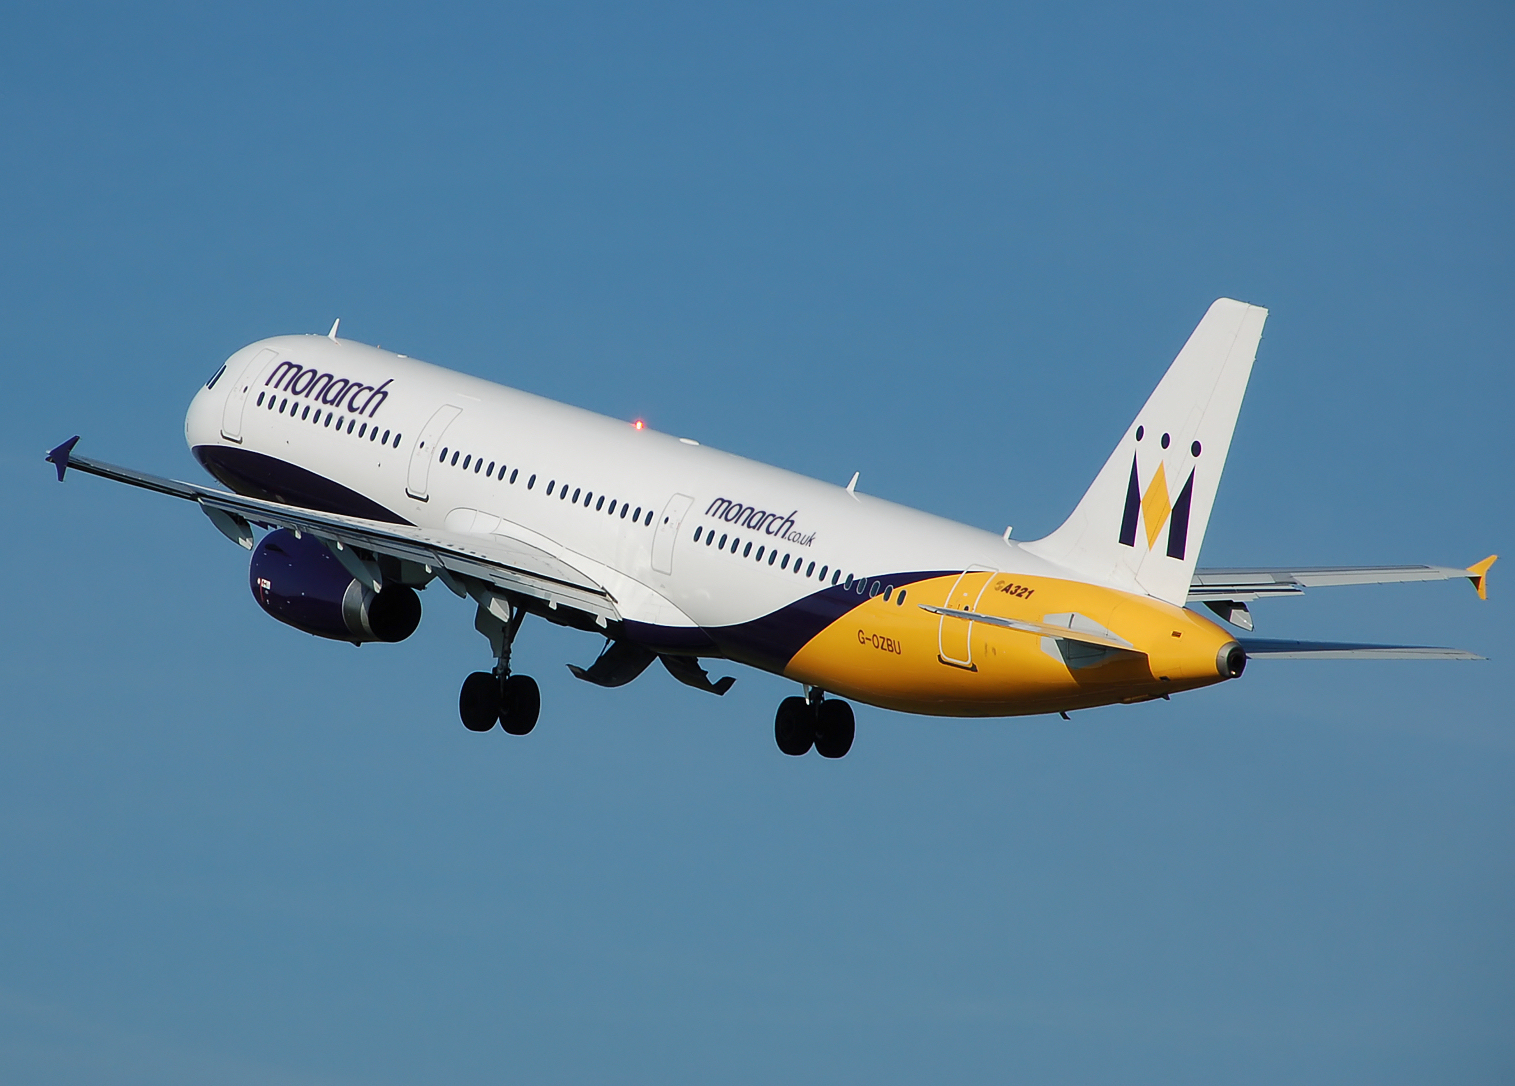 monarch_a321-200_g-ozbu_takeoff_from_manchester_arp